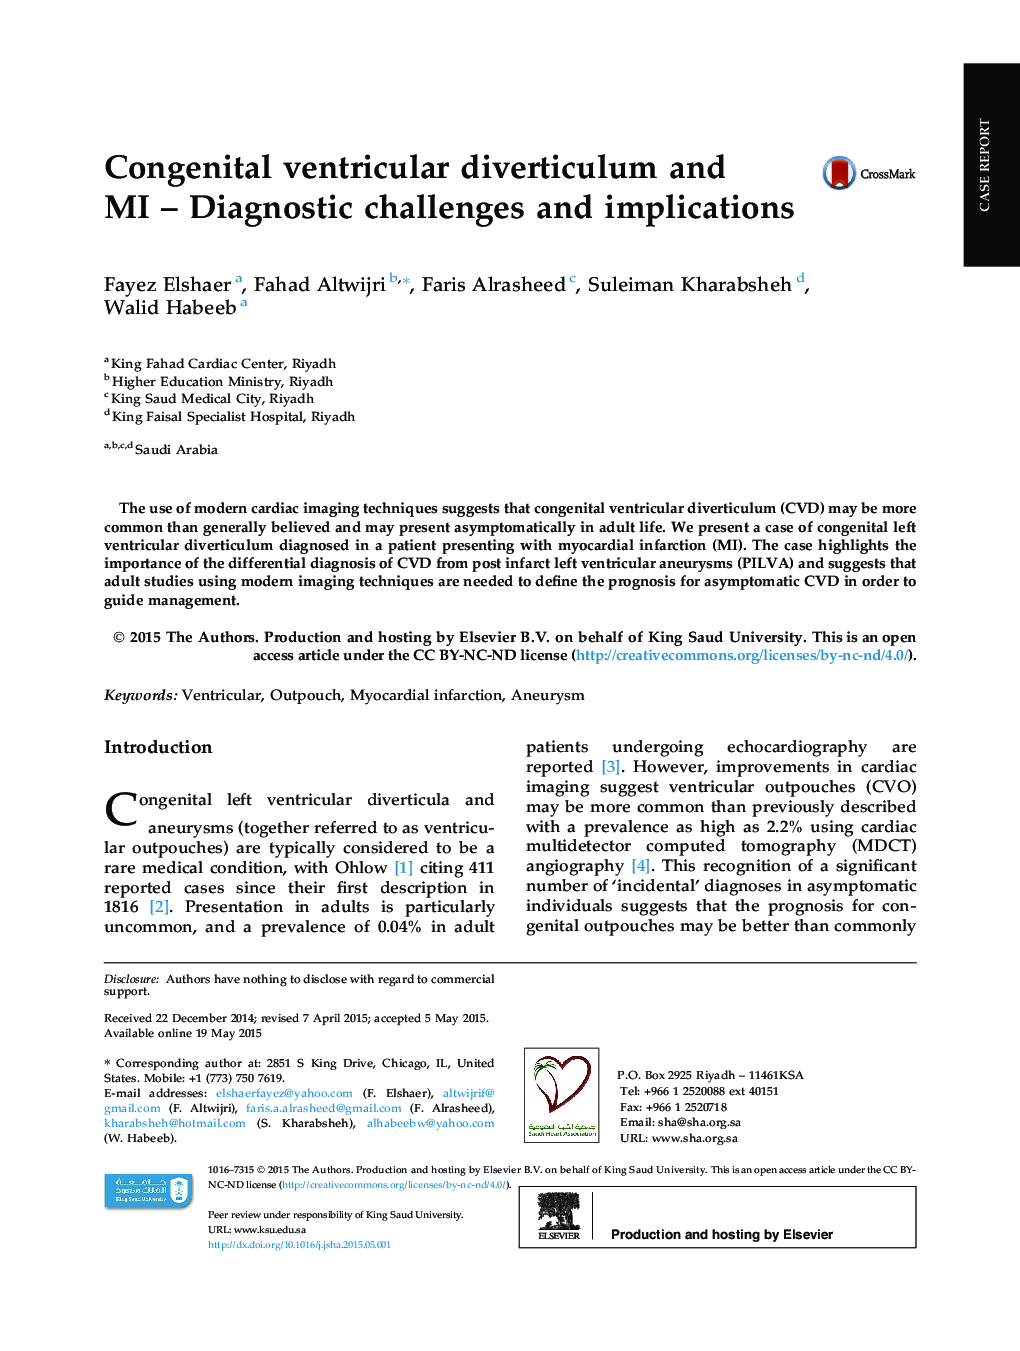 Congenital ventricular diverticulum and MI – Diagnostic challenges and implications 